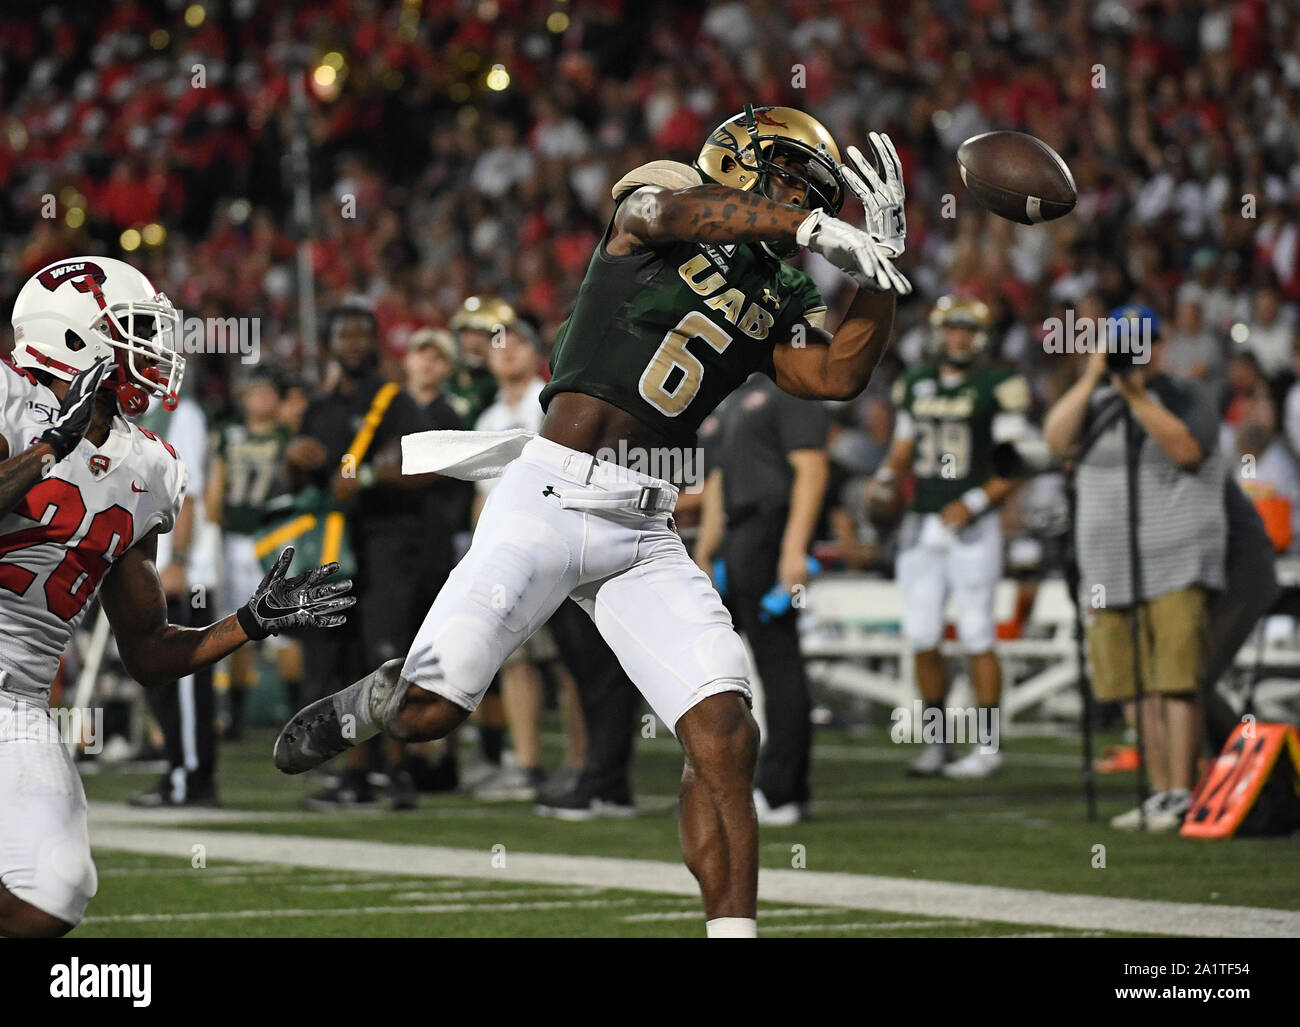 September 28, 2019: UAB Blazers wide receiver Austin Watkins (6) has the ball go through his hands during a NCAA football game between the UAB Blazers and the WKU Hilltoppers at Houchens Industries-LT Smith Stadium (Photo Credit: Steve Roberts.CSM) Stock Photo